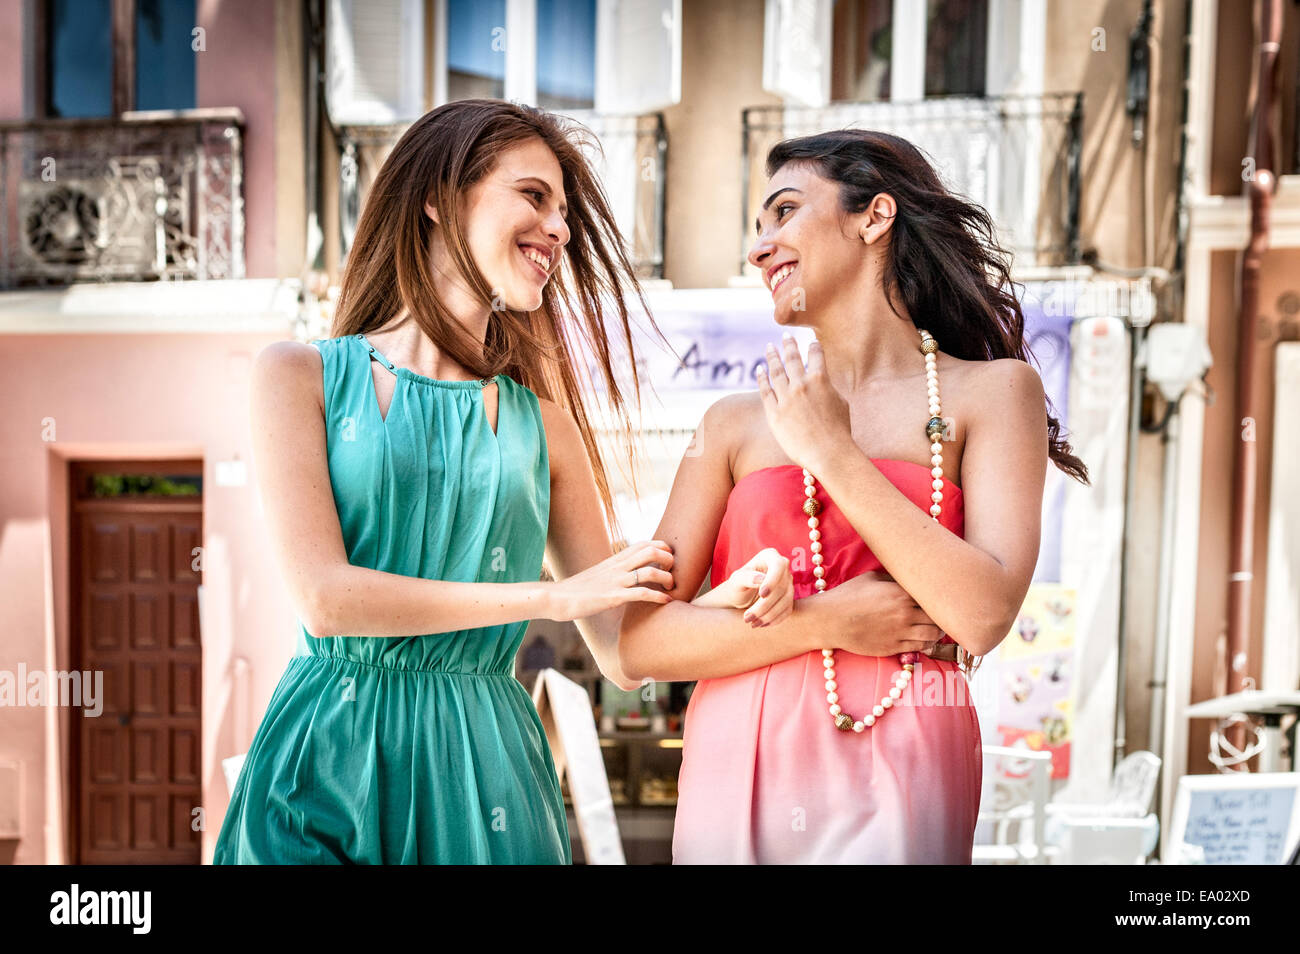 Two fashionable young women chatting and strolling down street, Cagliari, Sardinia, Italy Stock Photo